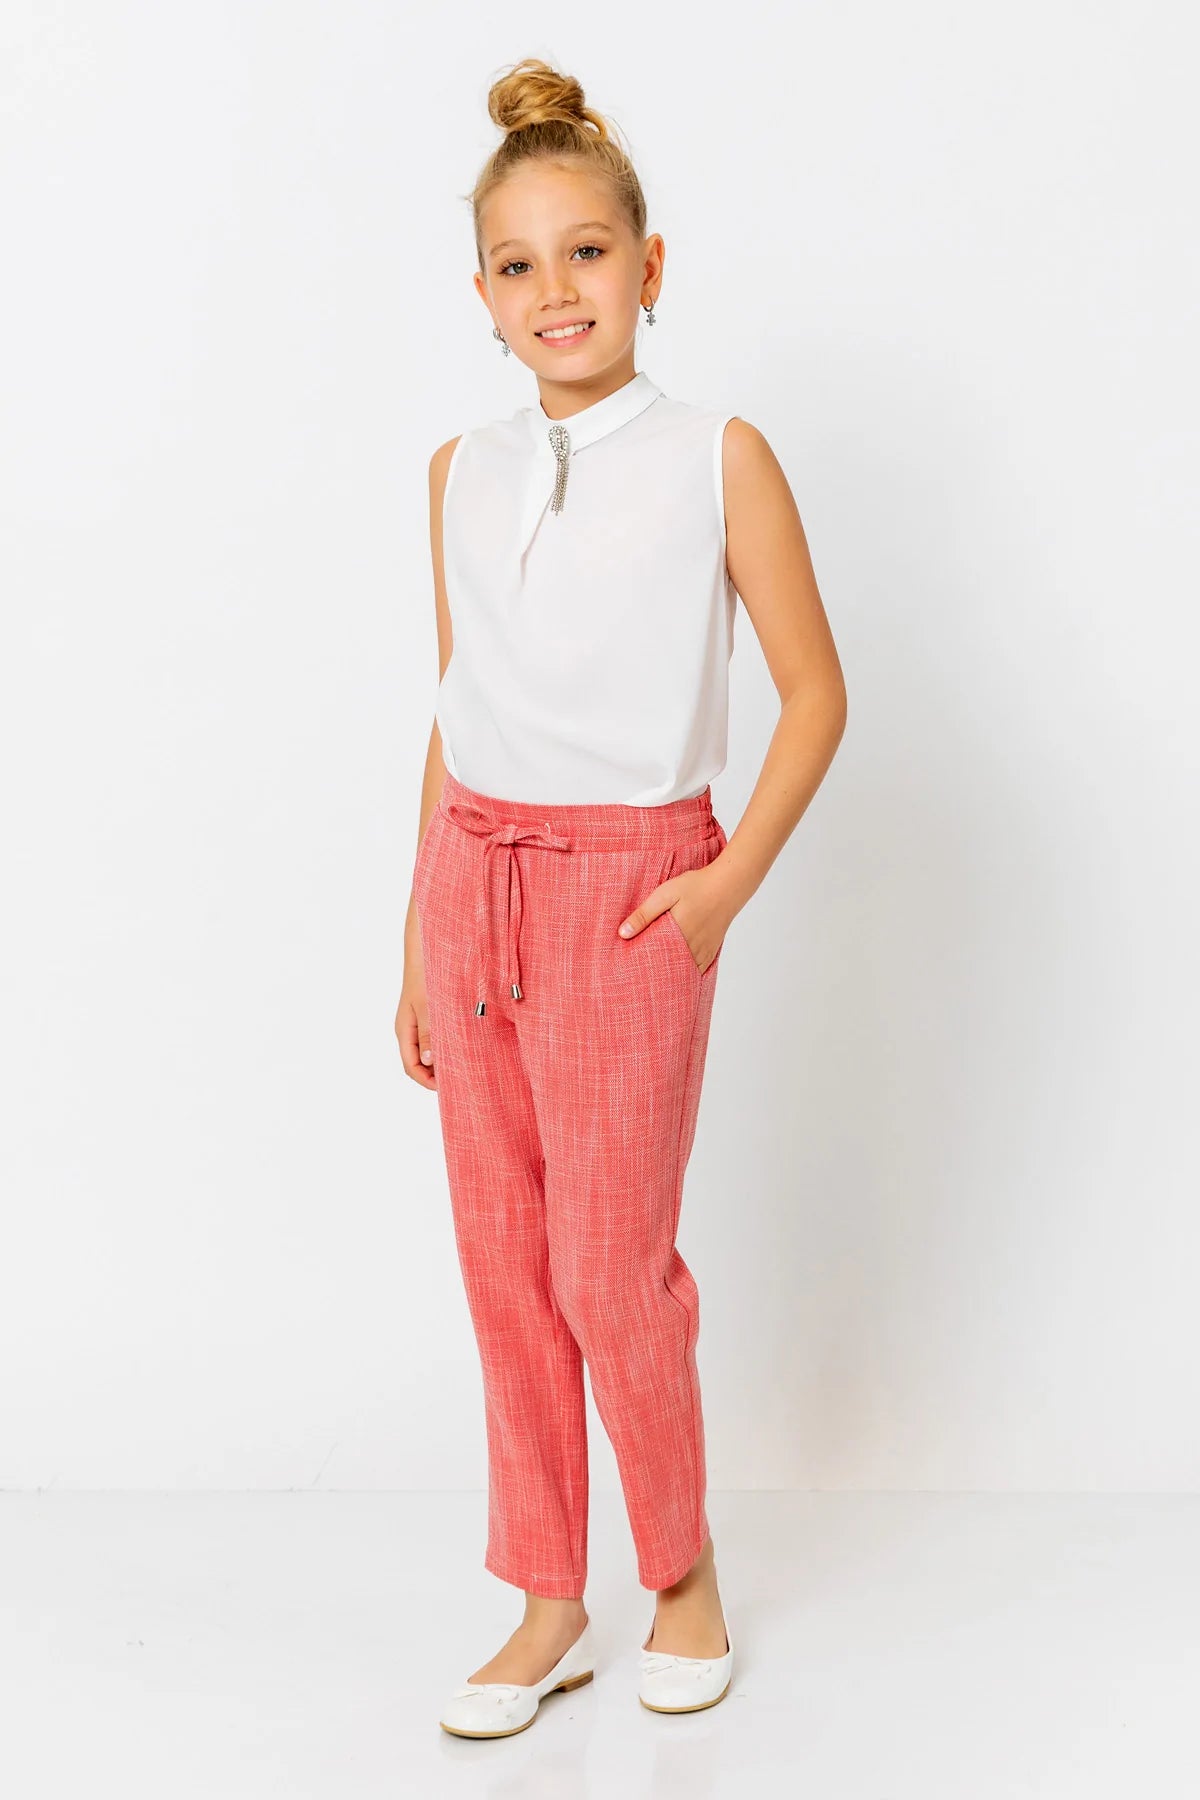 Girls Formal Trousers - Nell Gray